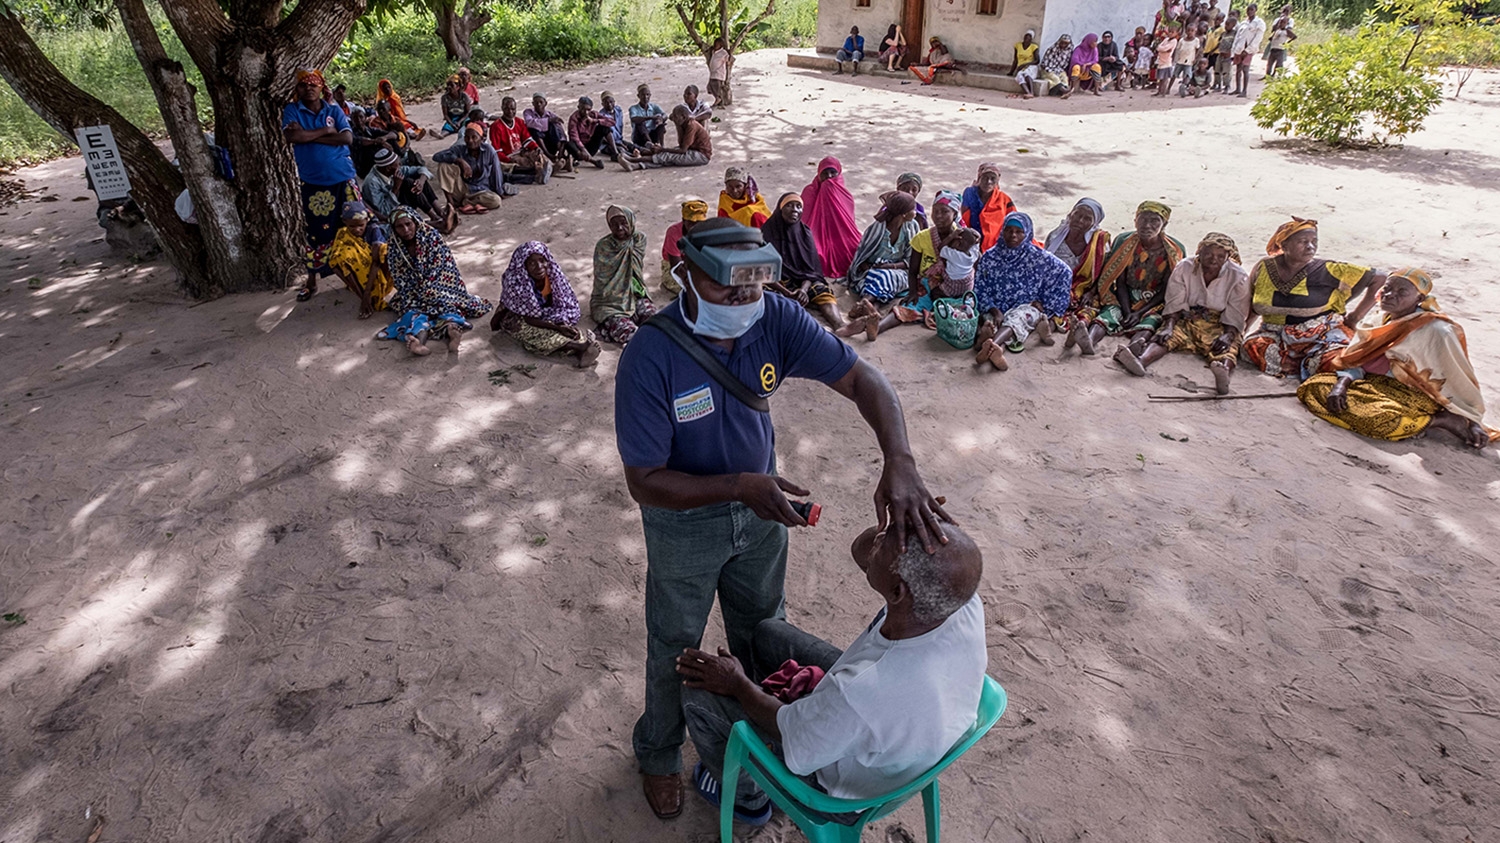 An eye health worker checks a man's eye during an outdoor community screening session in Mozambique.